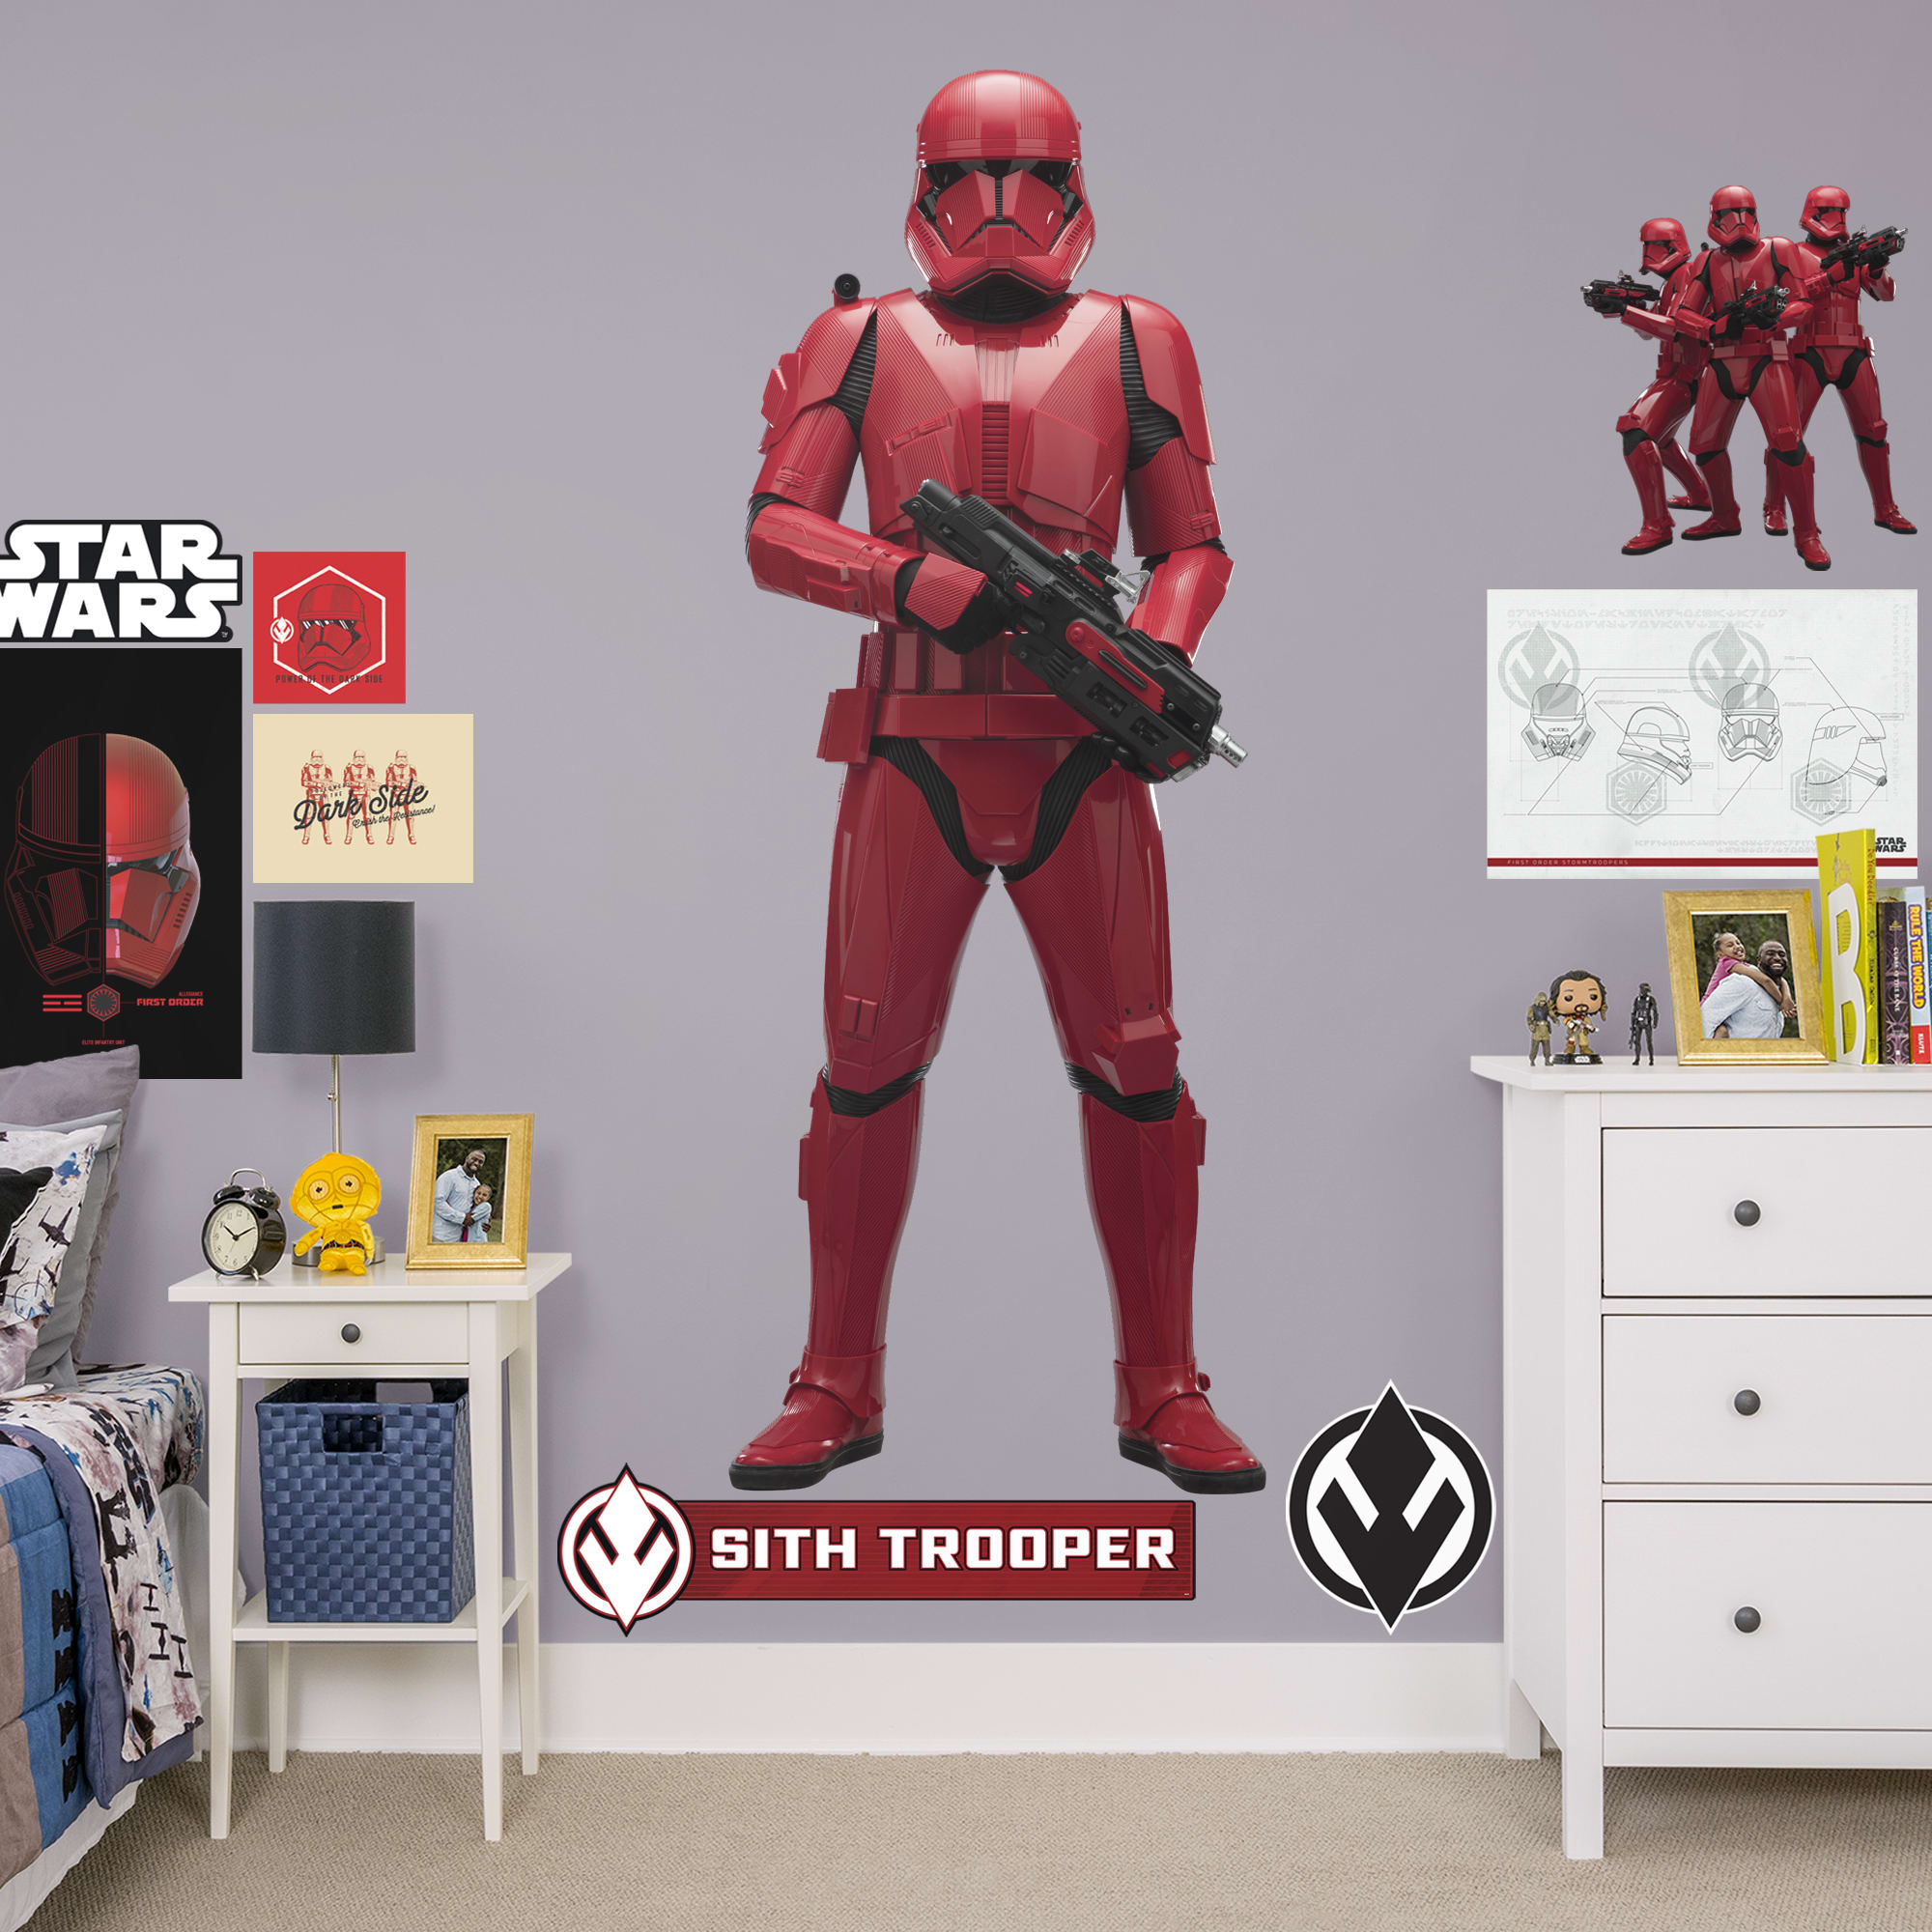 Sith Trooper - Officially Licensed Removable Wall Decal Life-Size Character + 9 Decals (30"W x 78"H) by Fathead | Vinyl